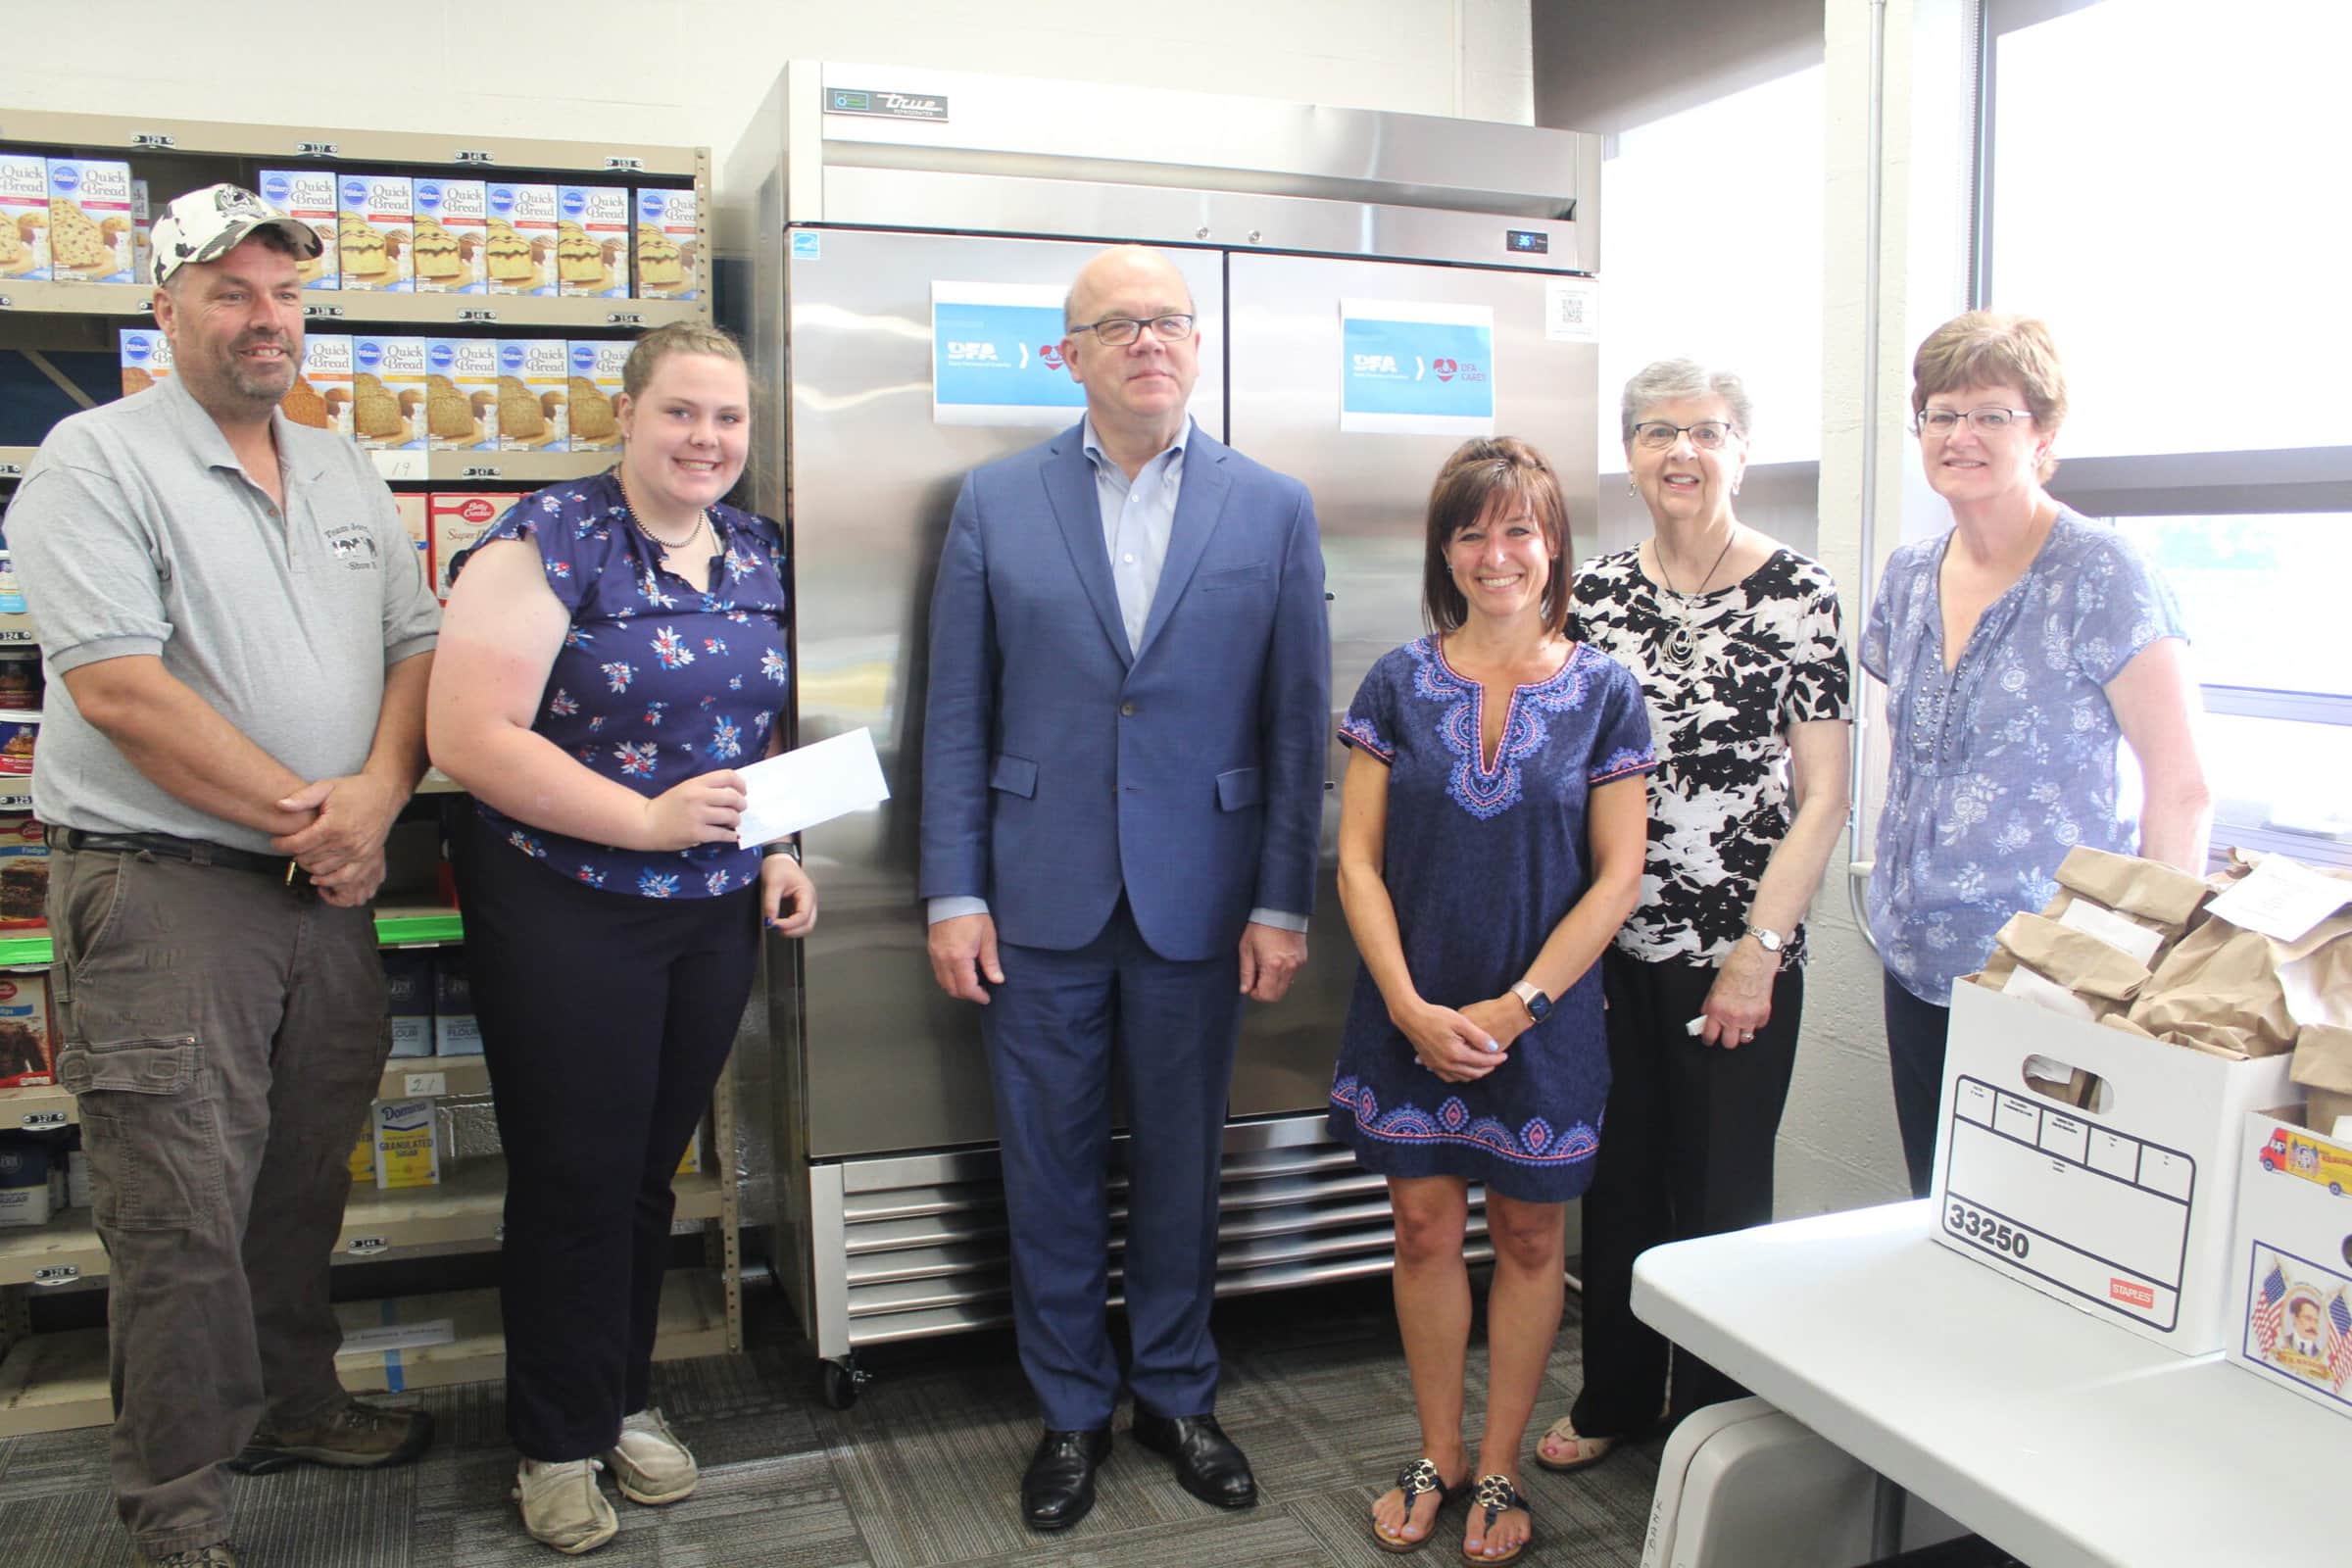 ‘We’re very grateful’: Rep. McGovern touts recent donation to Grafton Food Bank